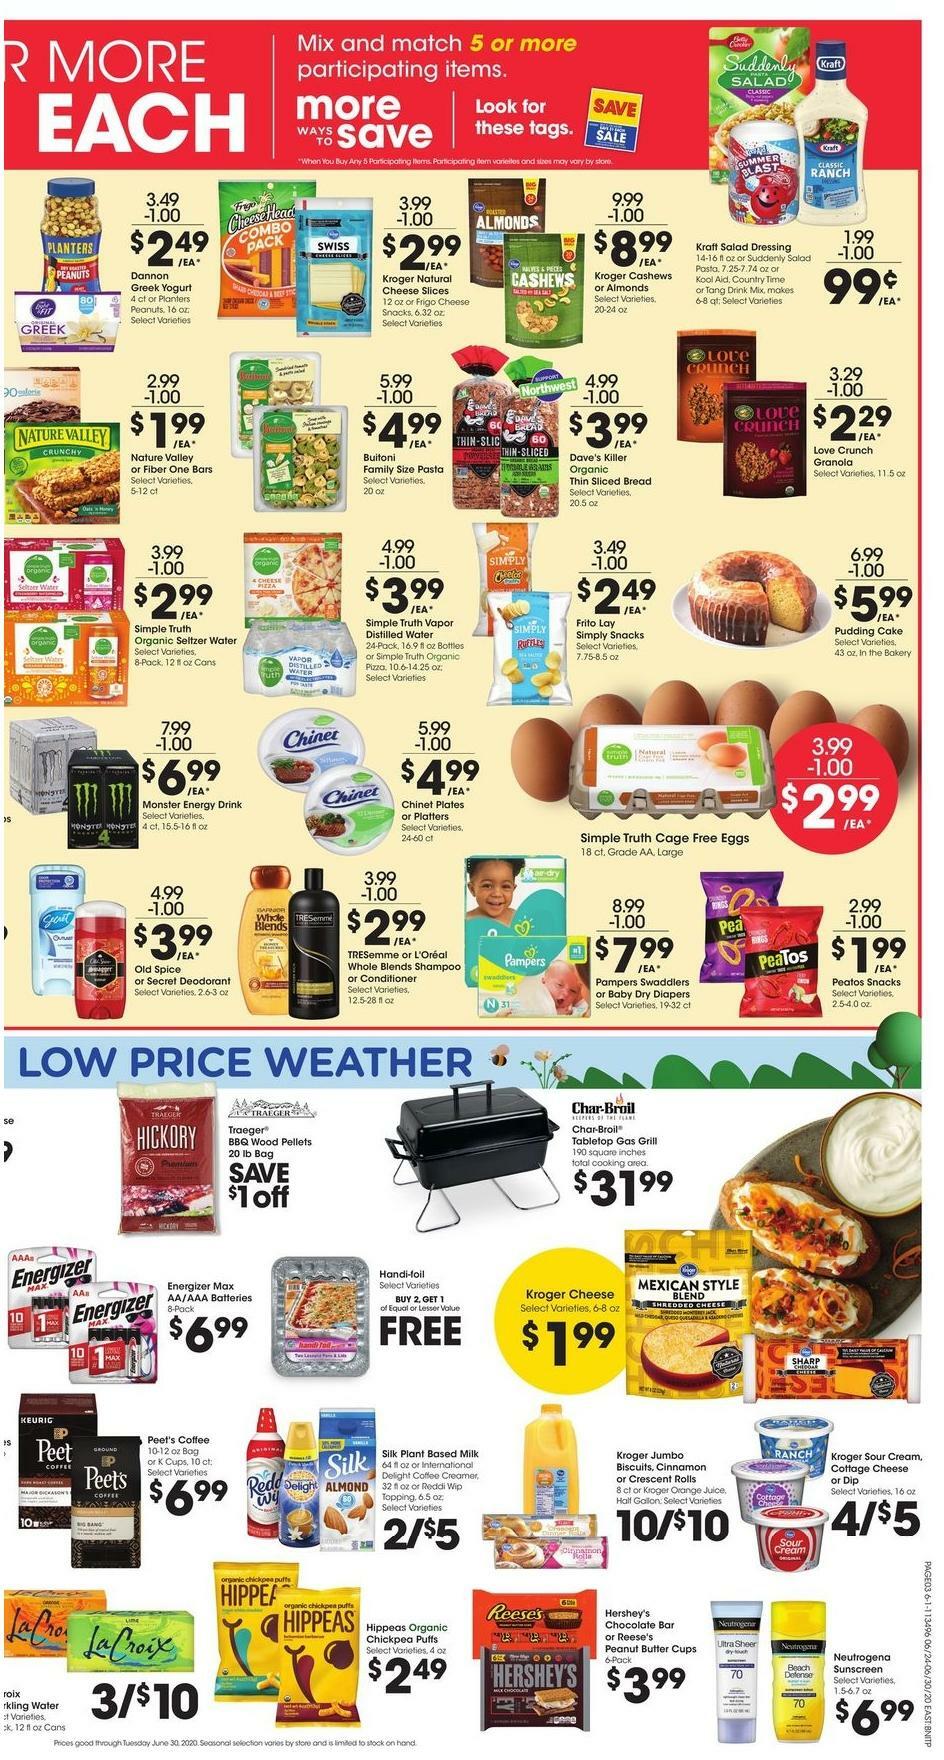 Fred Meyer Weekly Ad from June 24